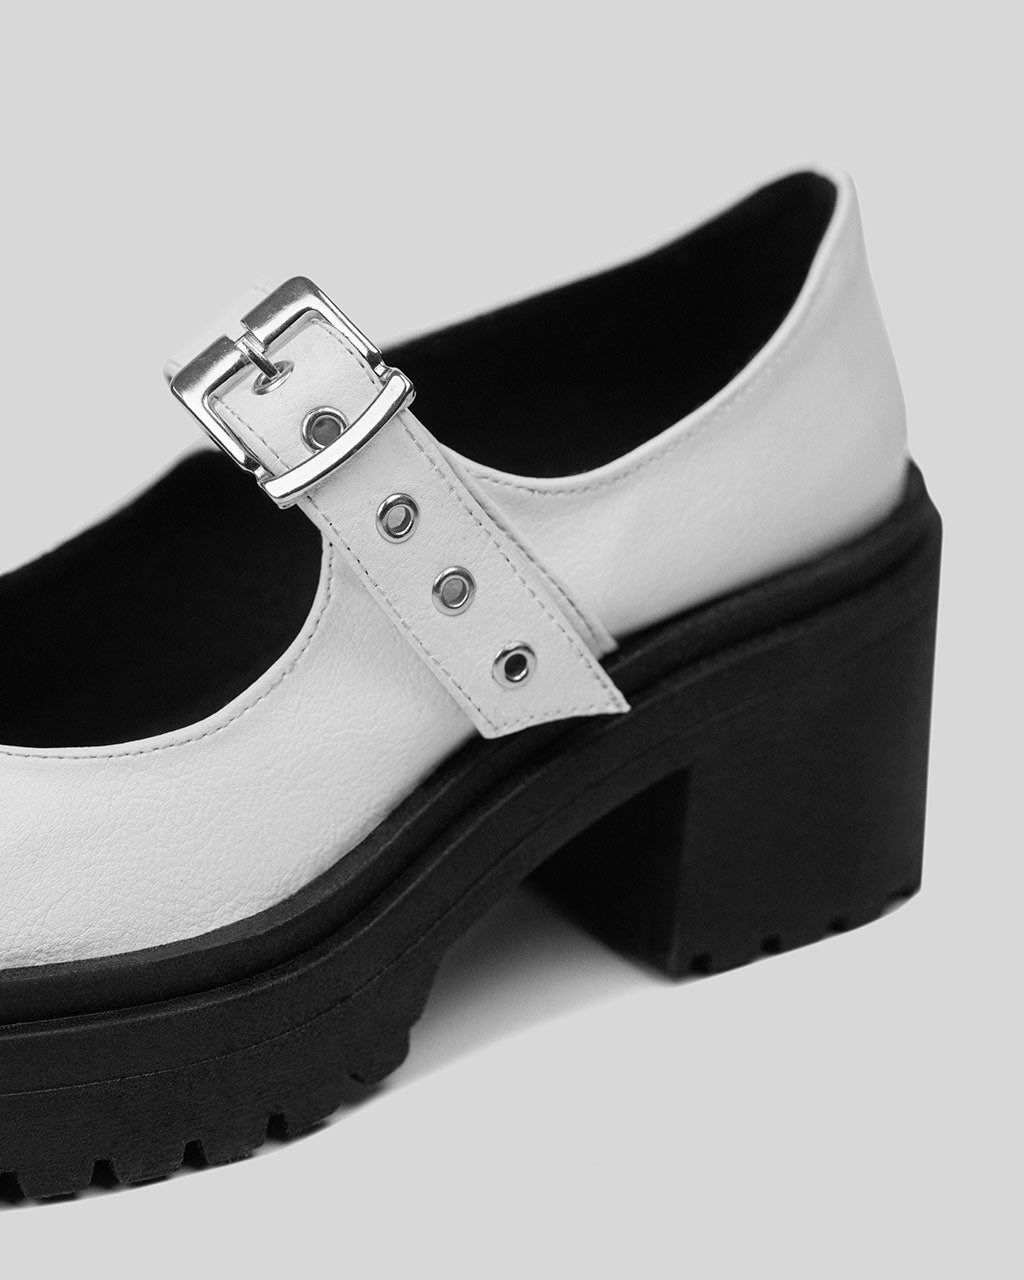 Squared Mary Jane Pumps White made of Vegea grape leather